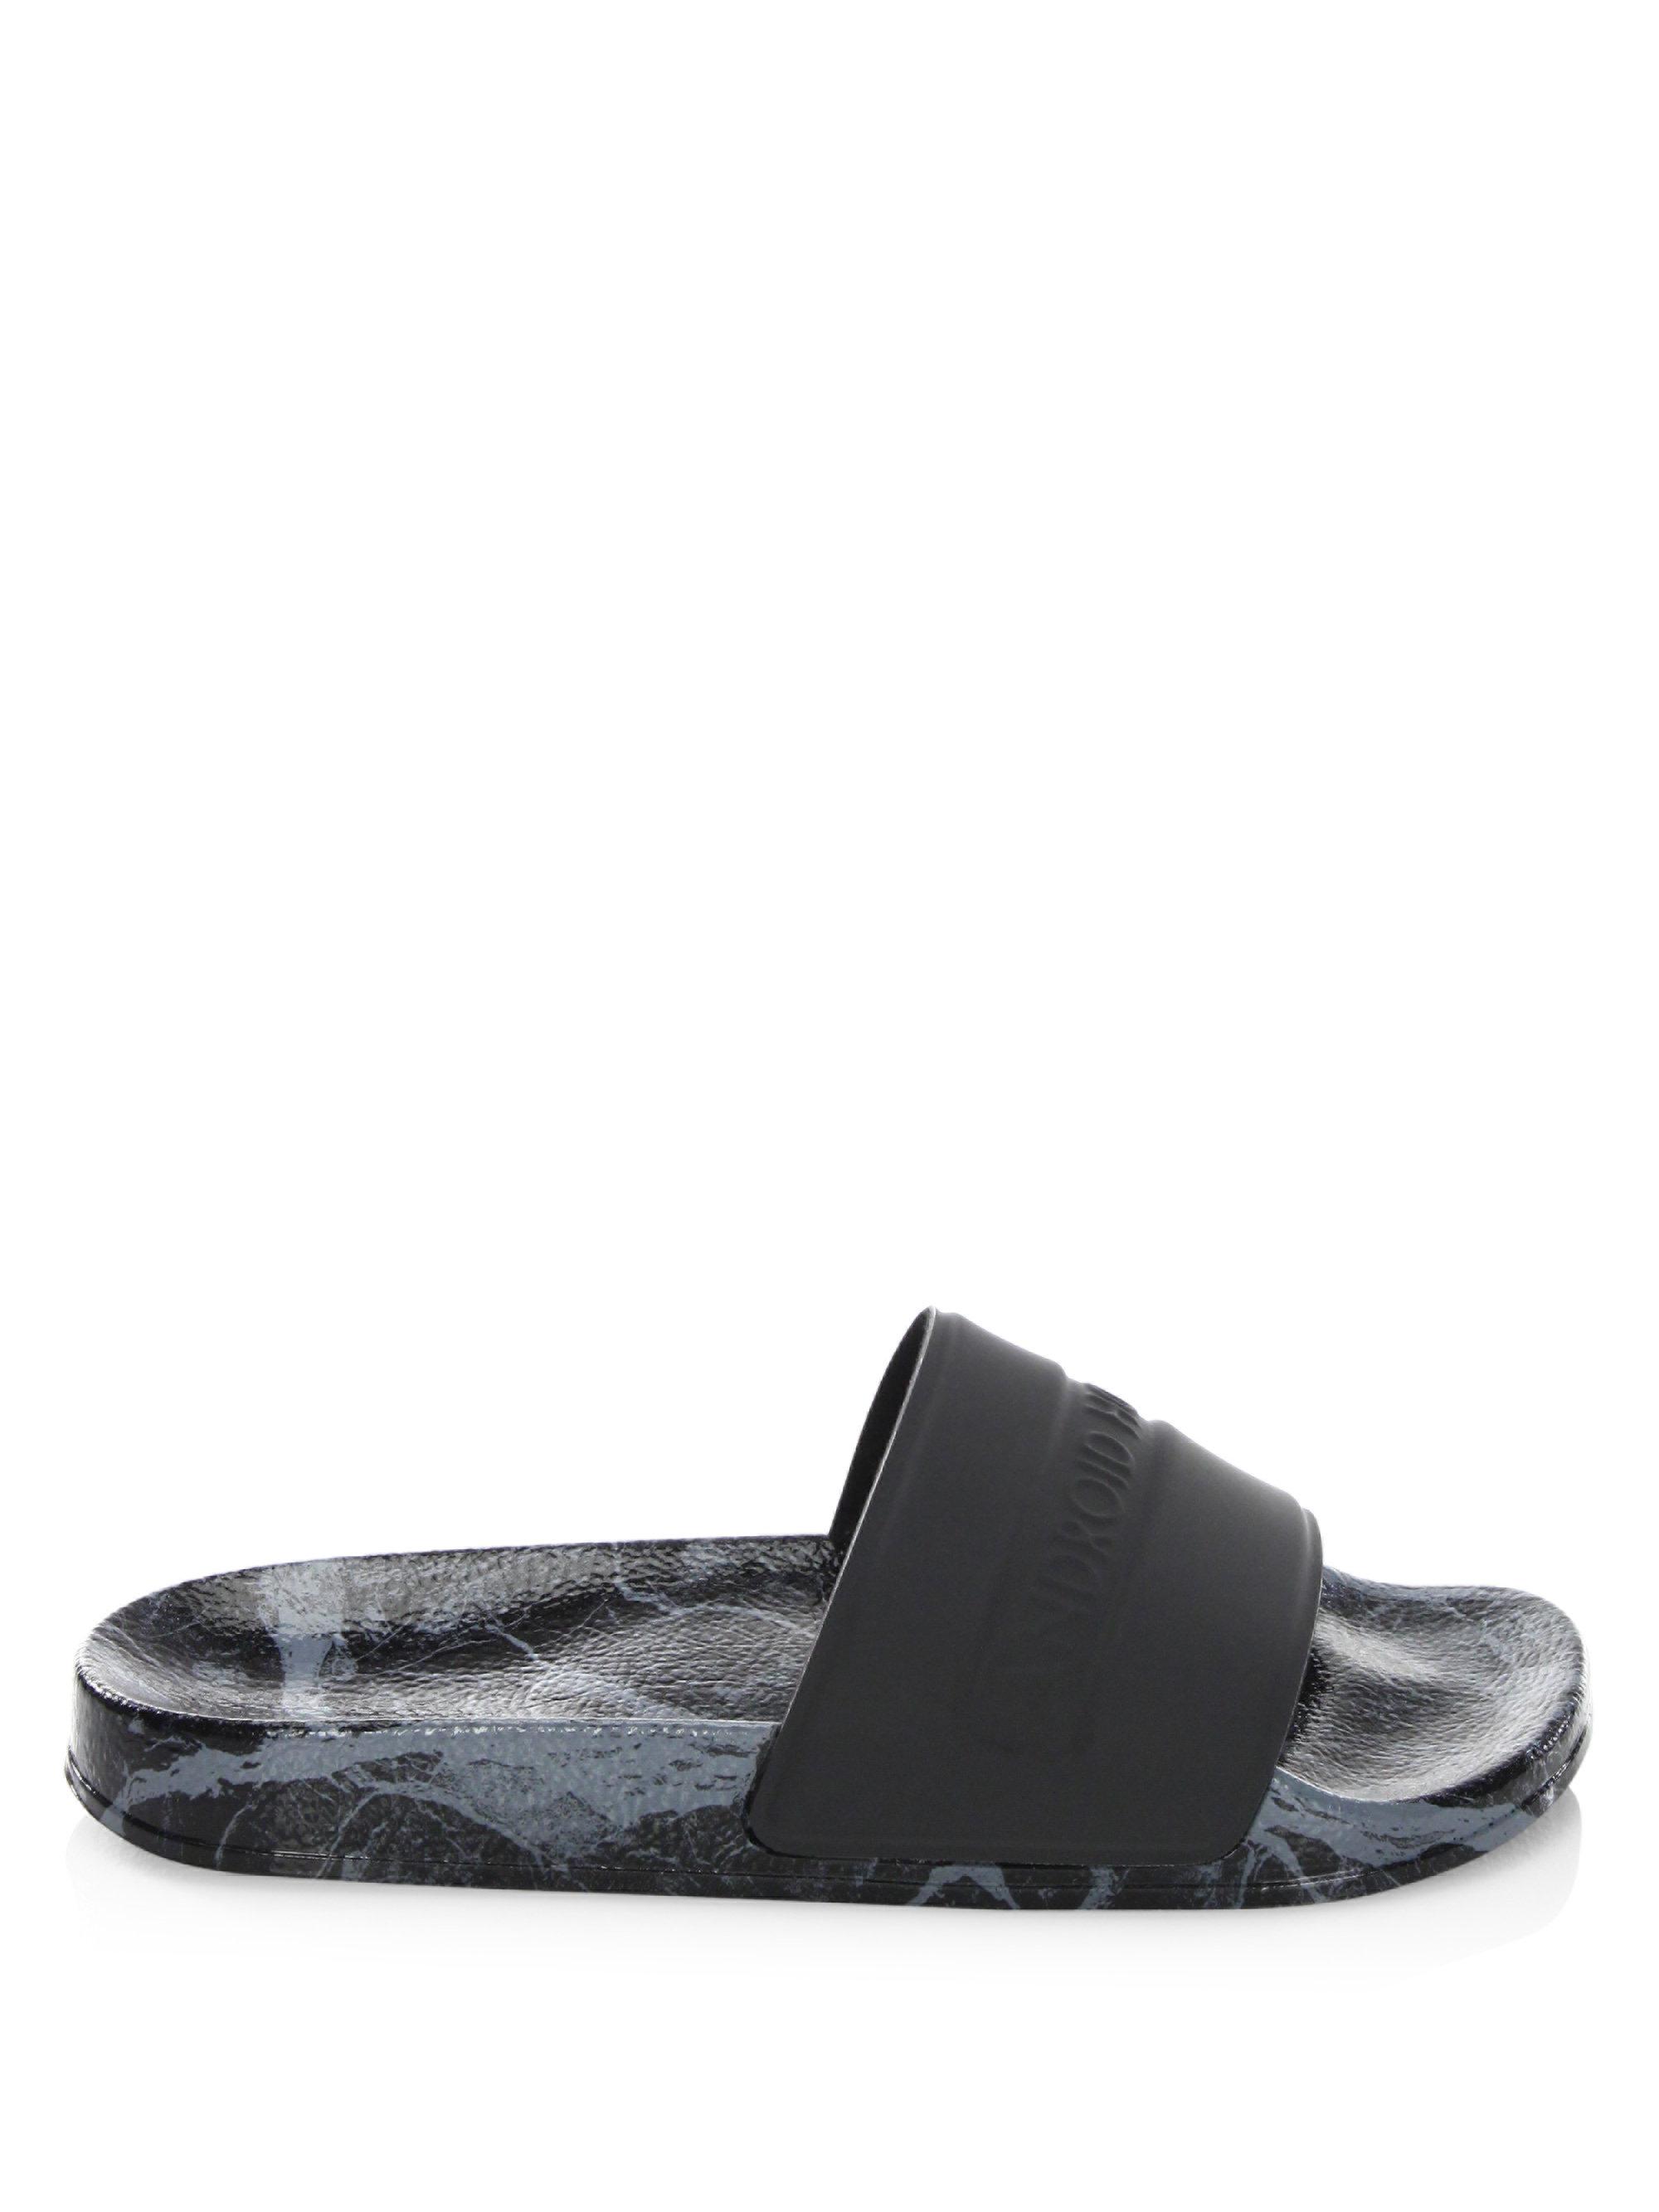 android homme sliders